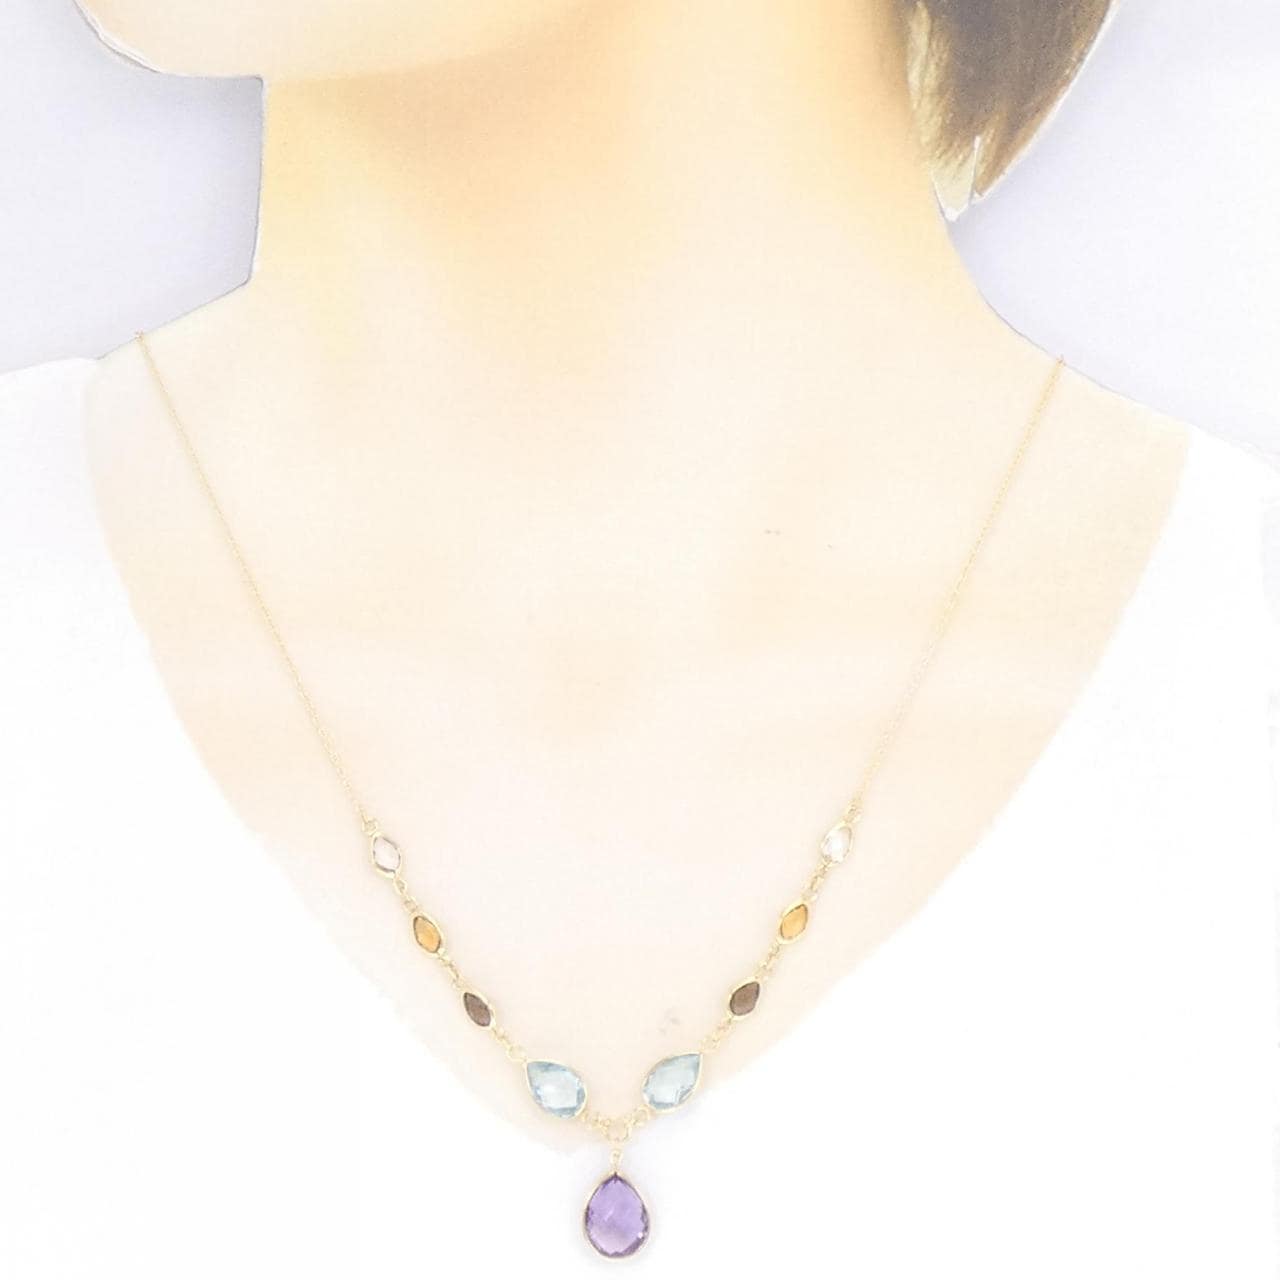 750YG colored stone necklace